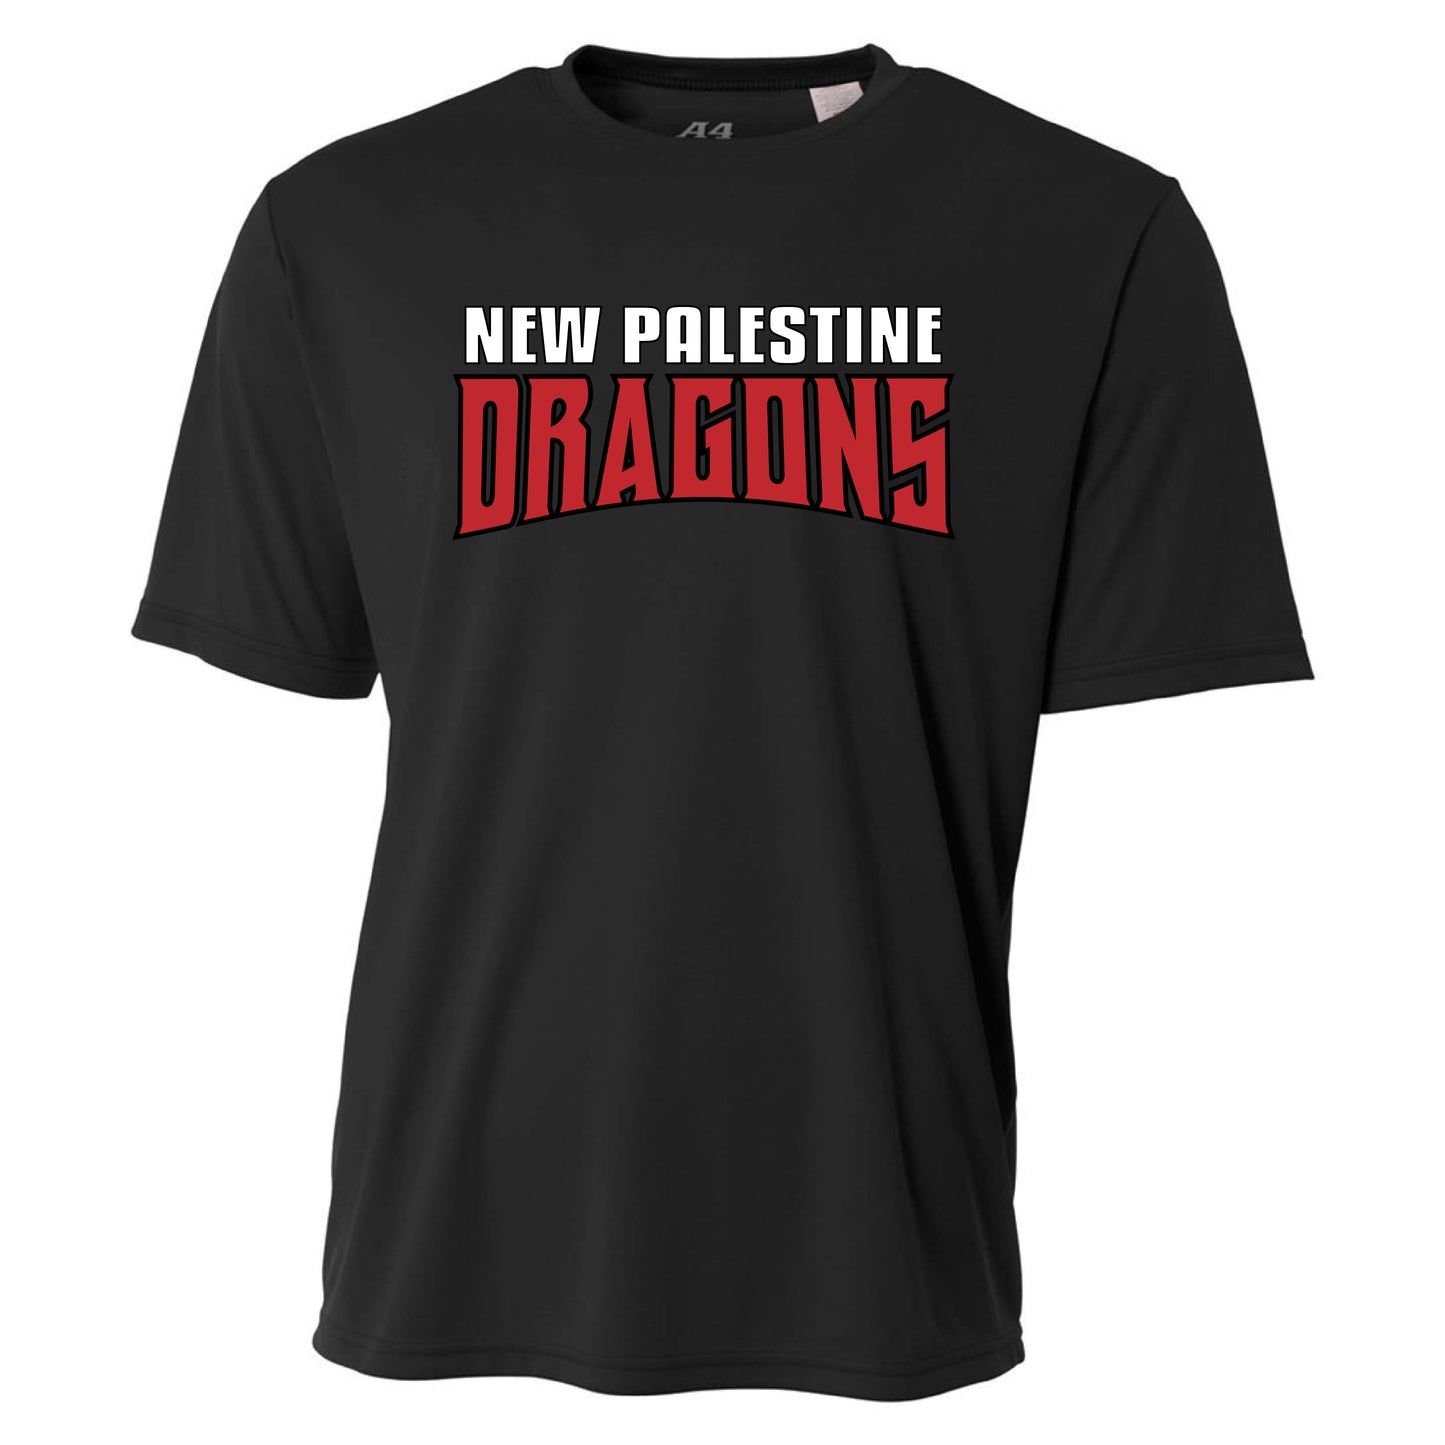 Youth S/S T-Shirt - New Palestine Dragons